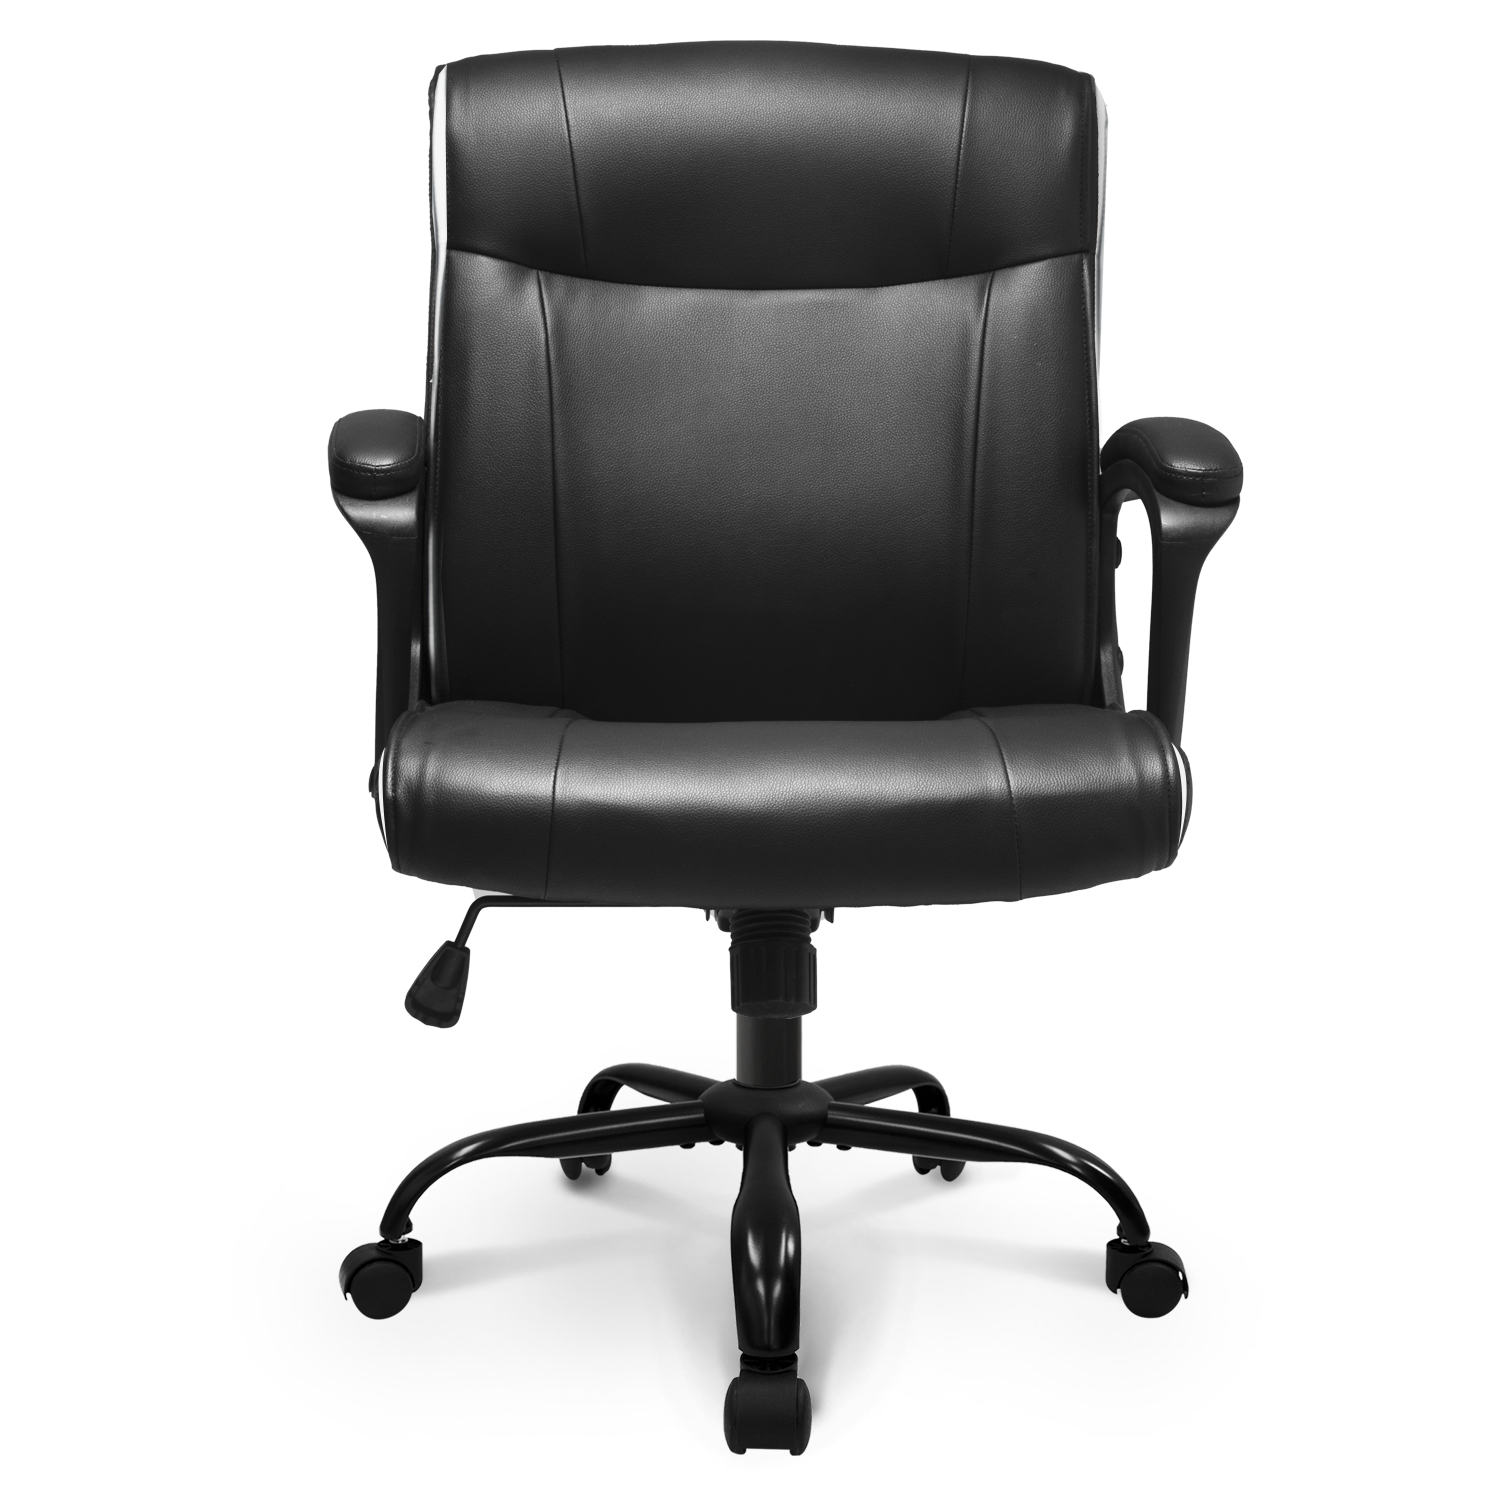 PAC Mid Back Classic Executive Chair